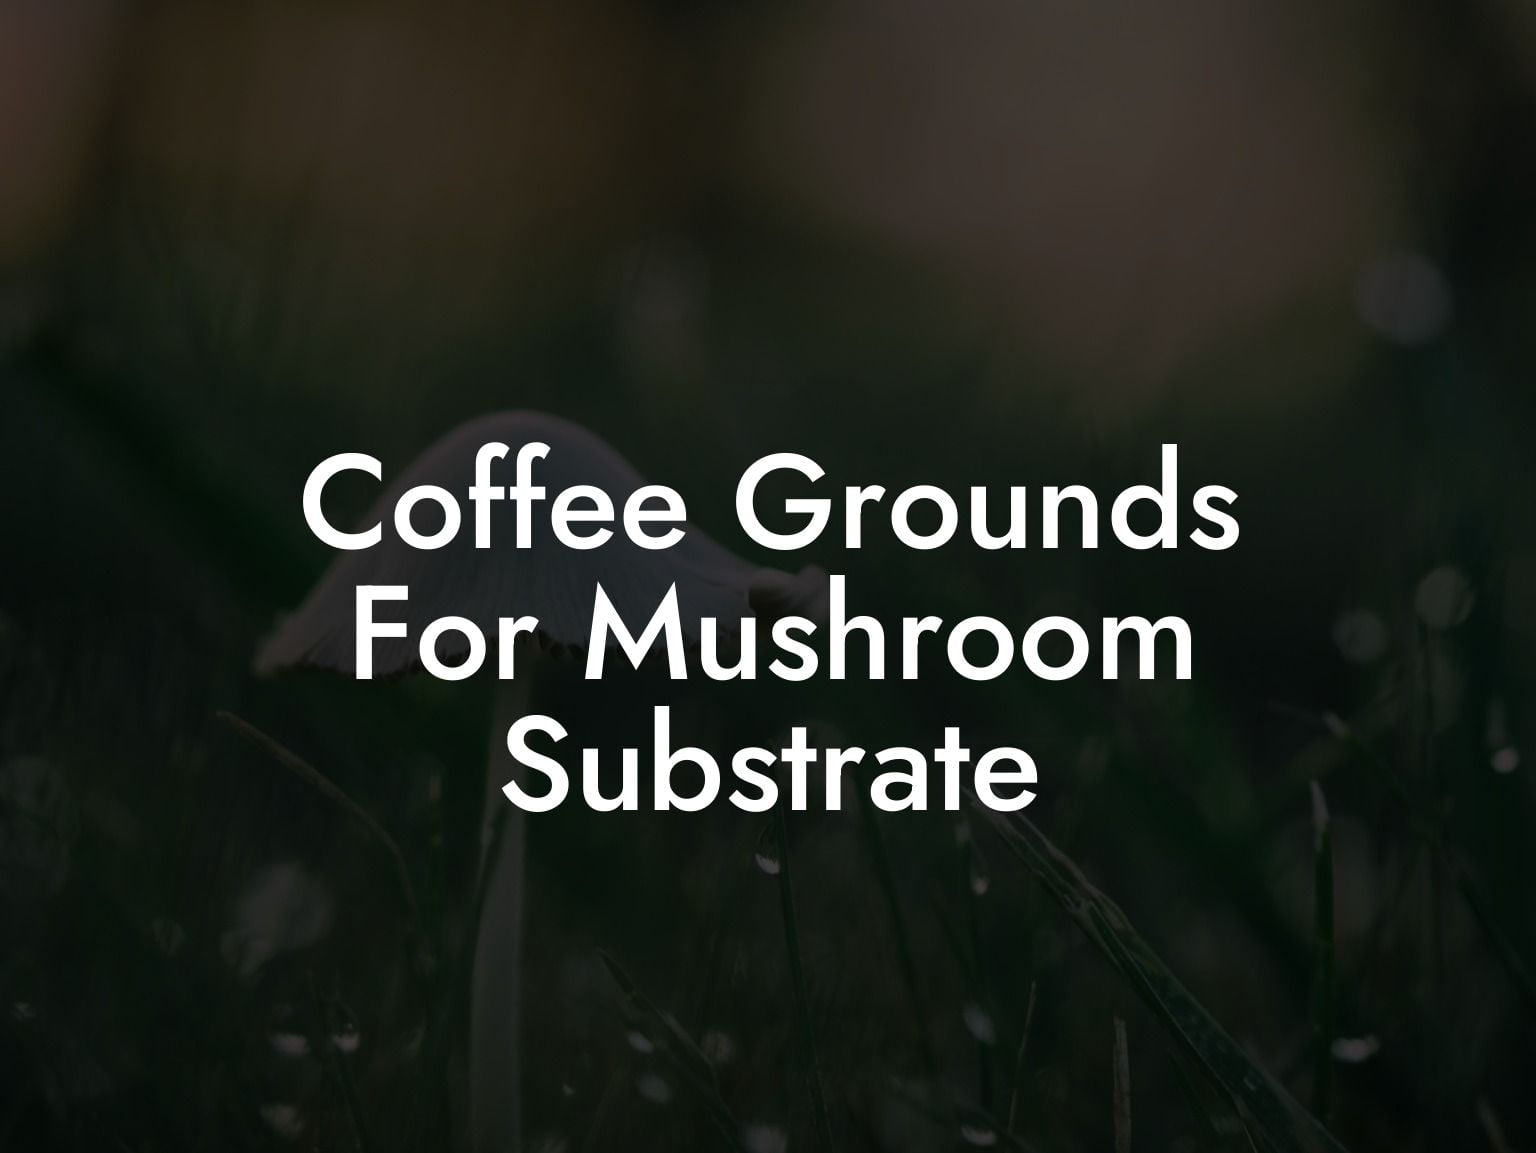 Coffee Grounds For Mushroom Substrate